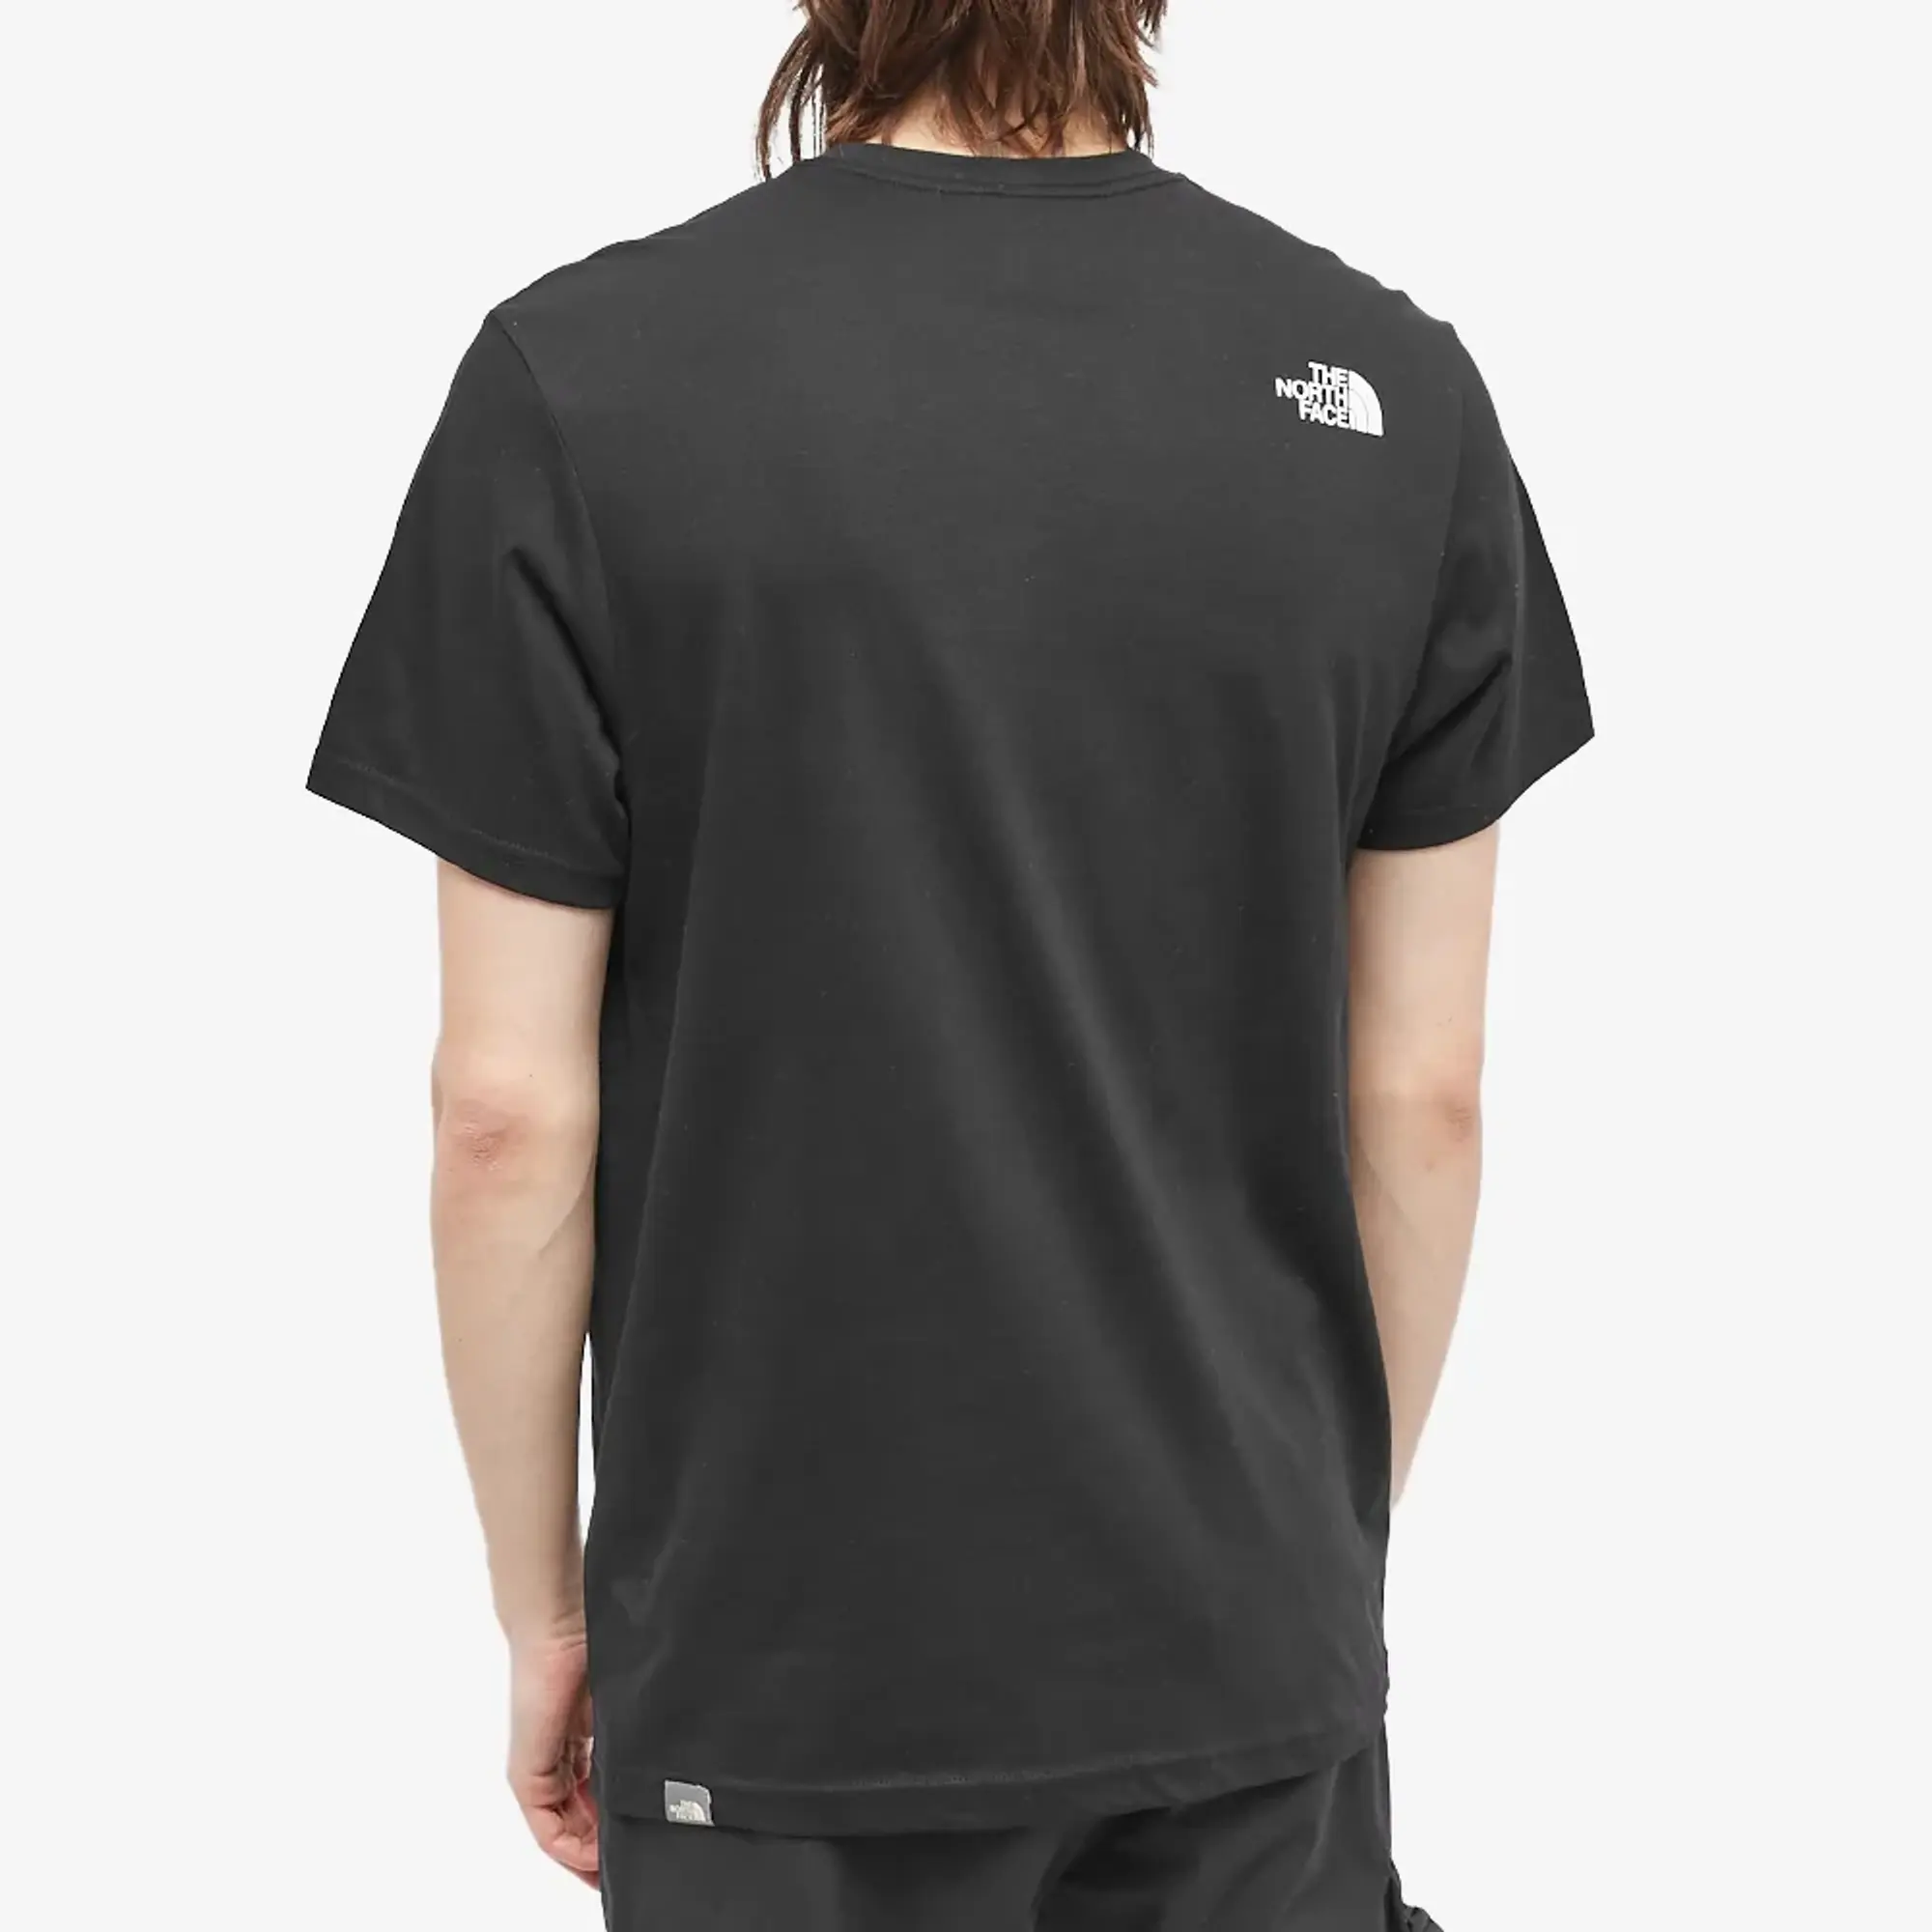 THE NORTH FACE Men's S/S Never Stop Exploring Tee - Black, Black